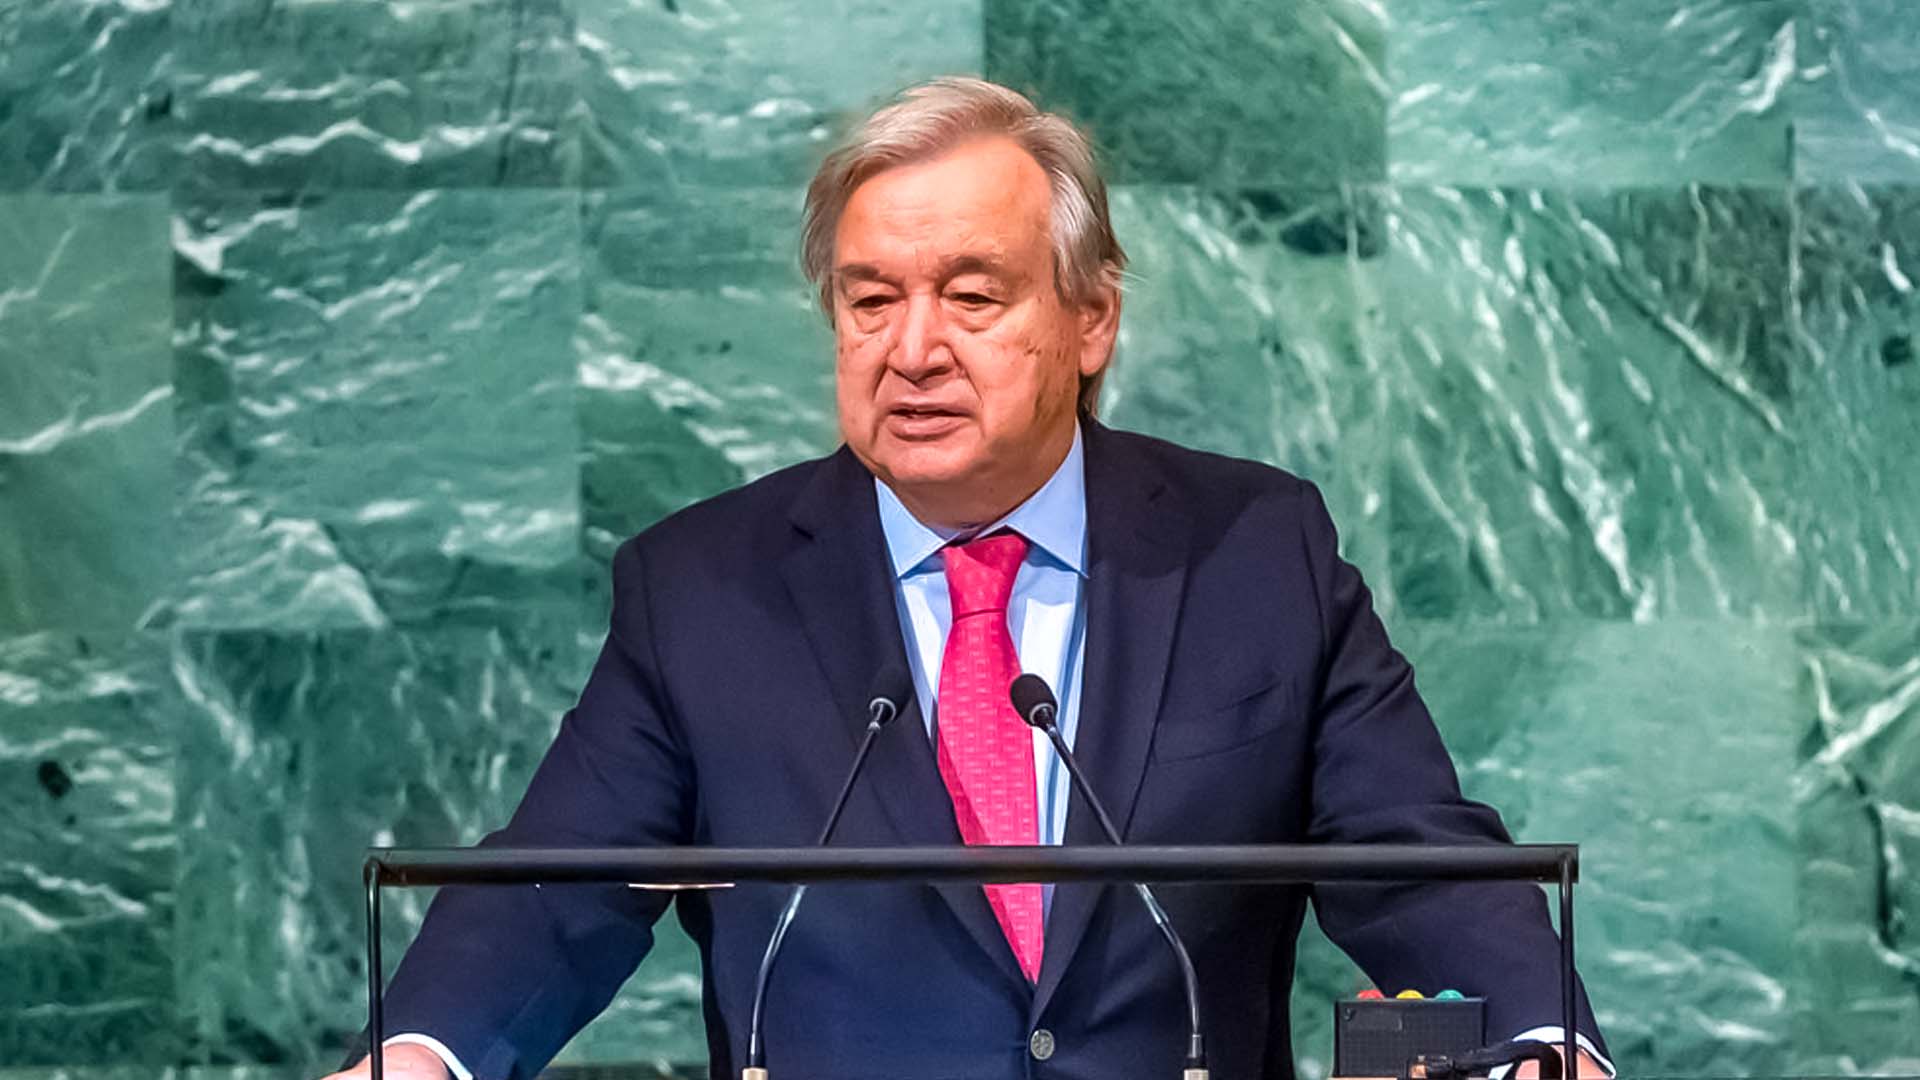 World is in great peril warns UN chief